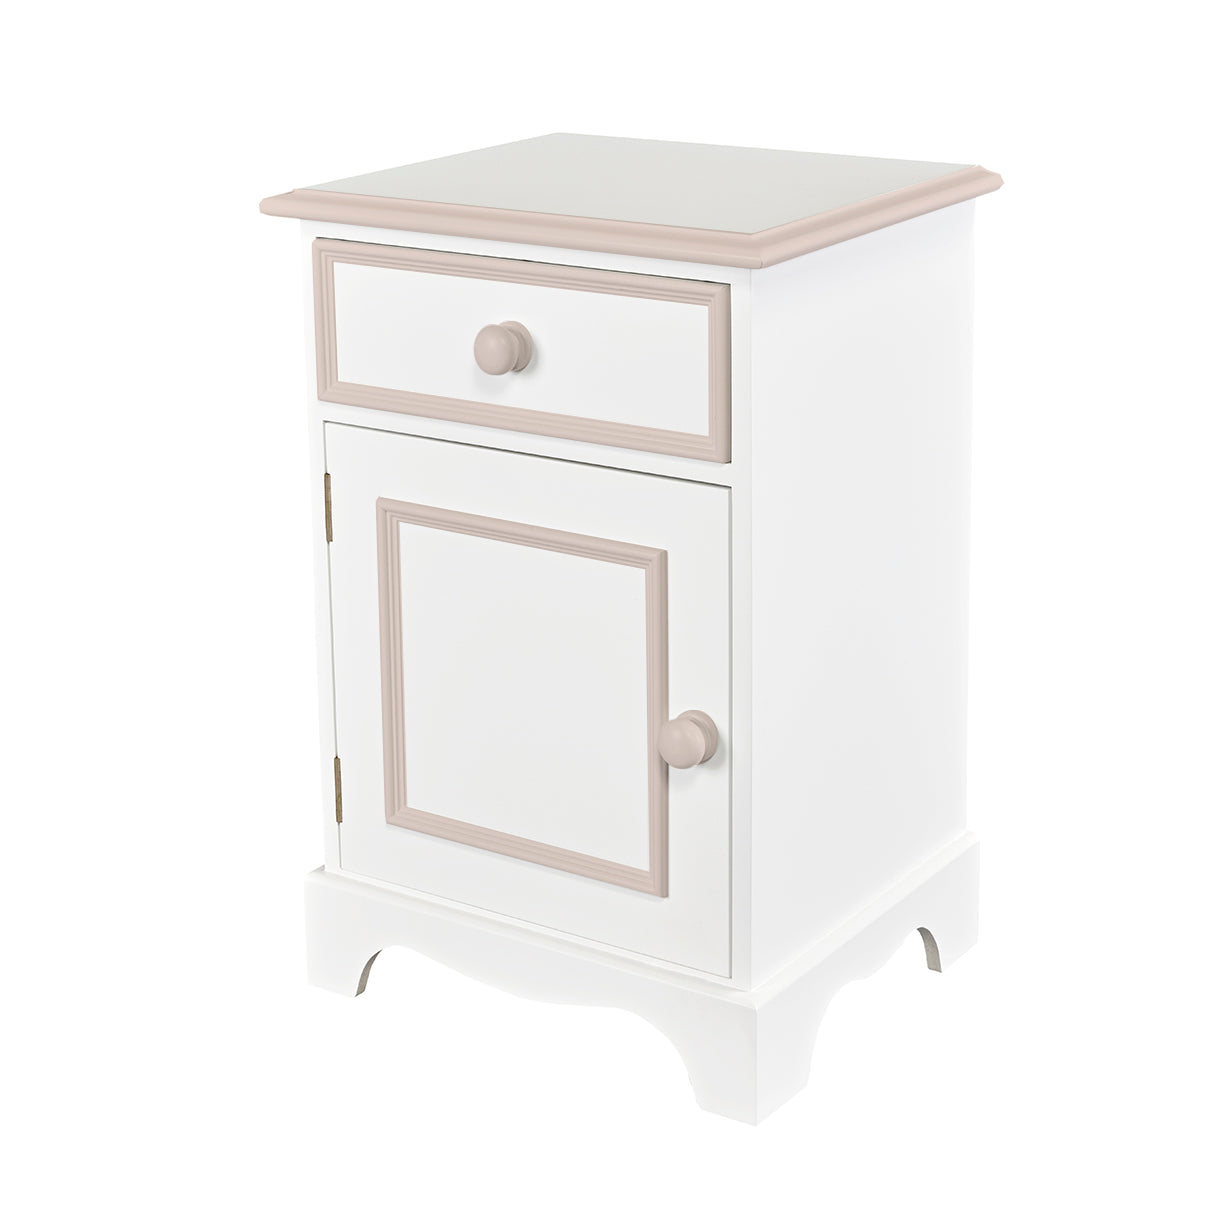 White and brown bedside table with drawer for kids room & nursery | Dragons of Walton Street